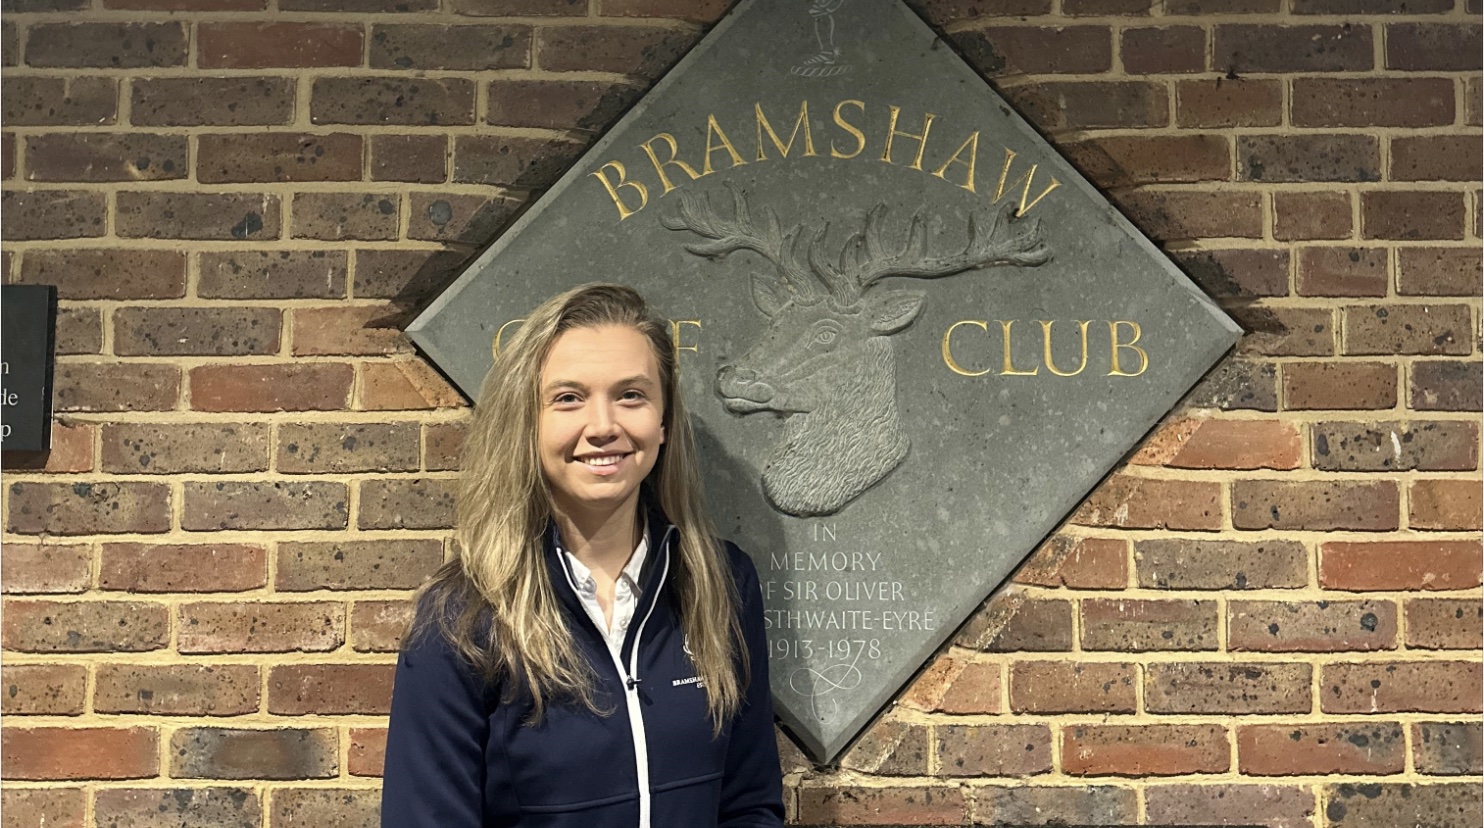 Bramshaw GC general manager Molly Pavey